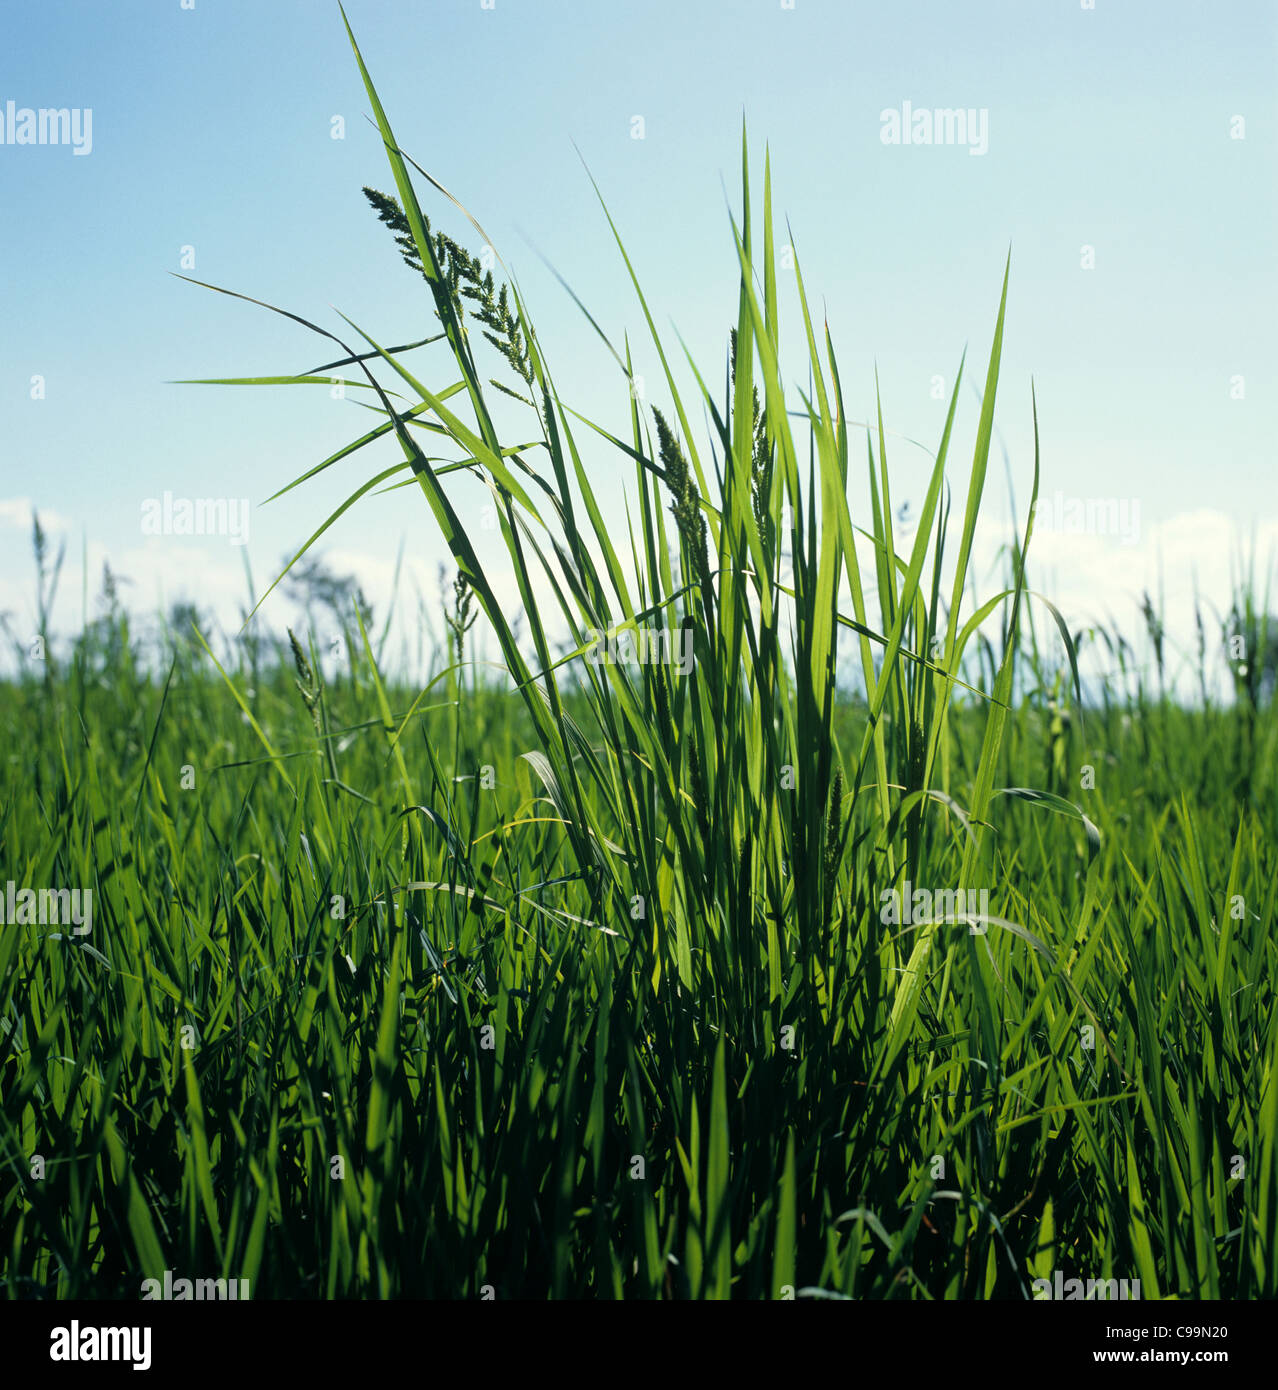 Barnyard grass (Echinocloa crus-galli) flowering plant in a rice paddy crop, Philippines Stock Photo